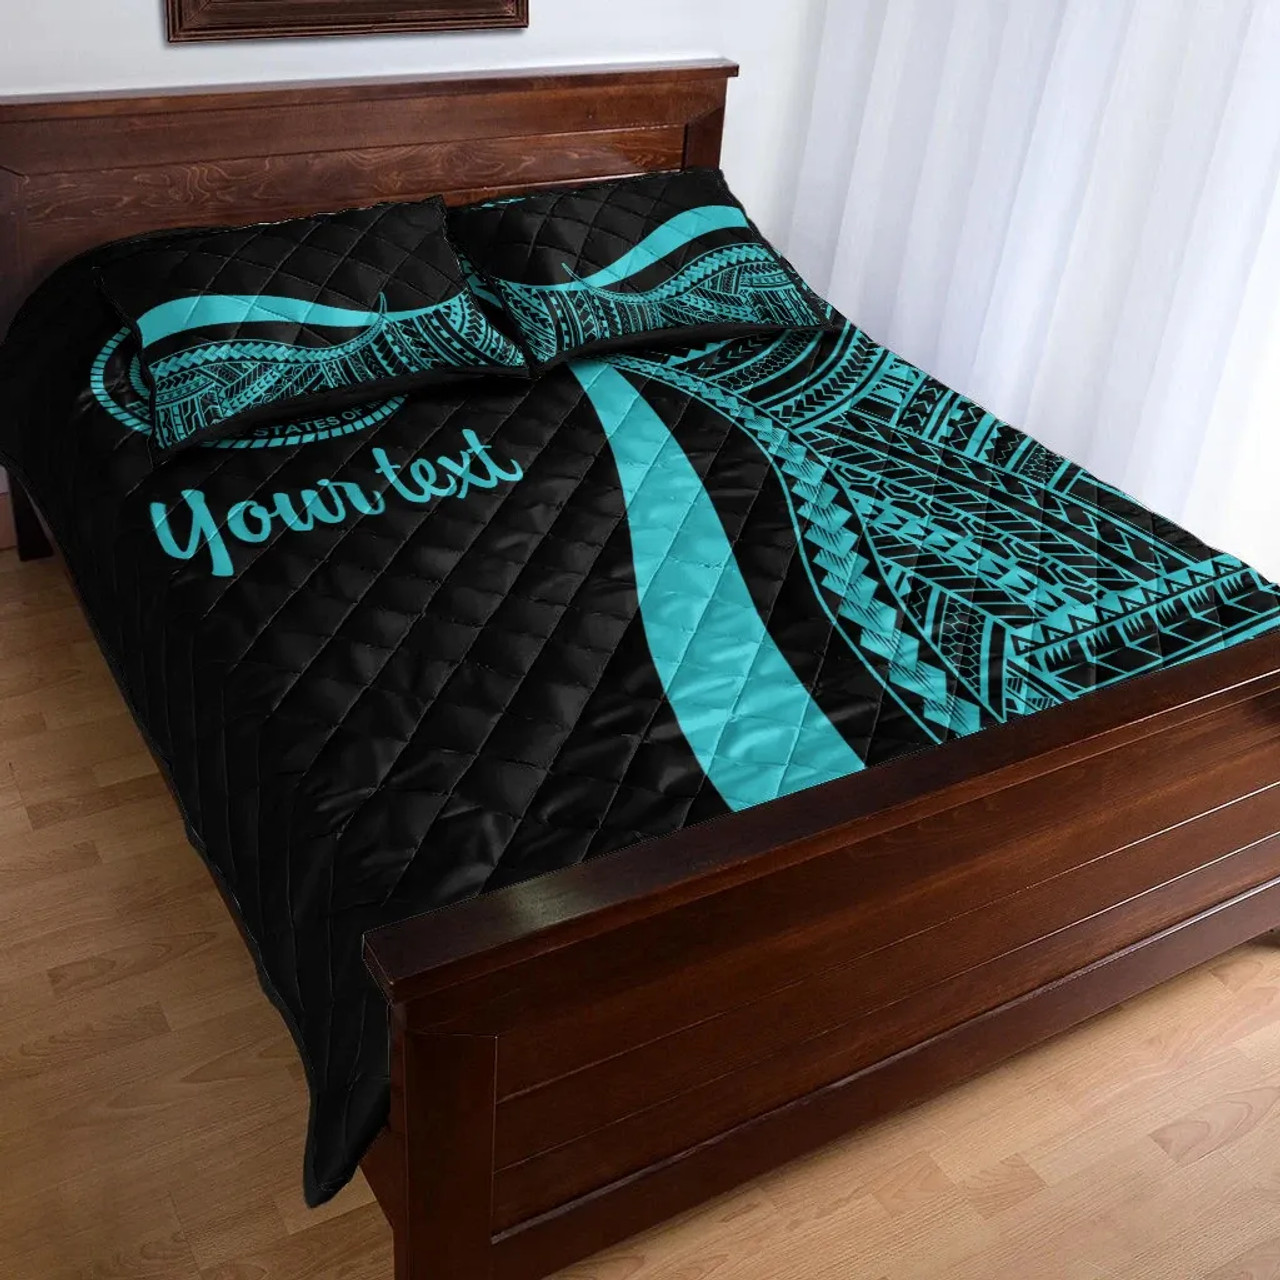 Federated States of Micronesia Custom Personalised Quilt Bet Set - Turquoise Polynesian Tentacle Tribal Pattern 3